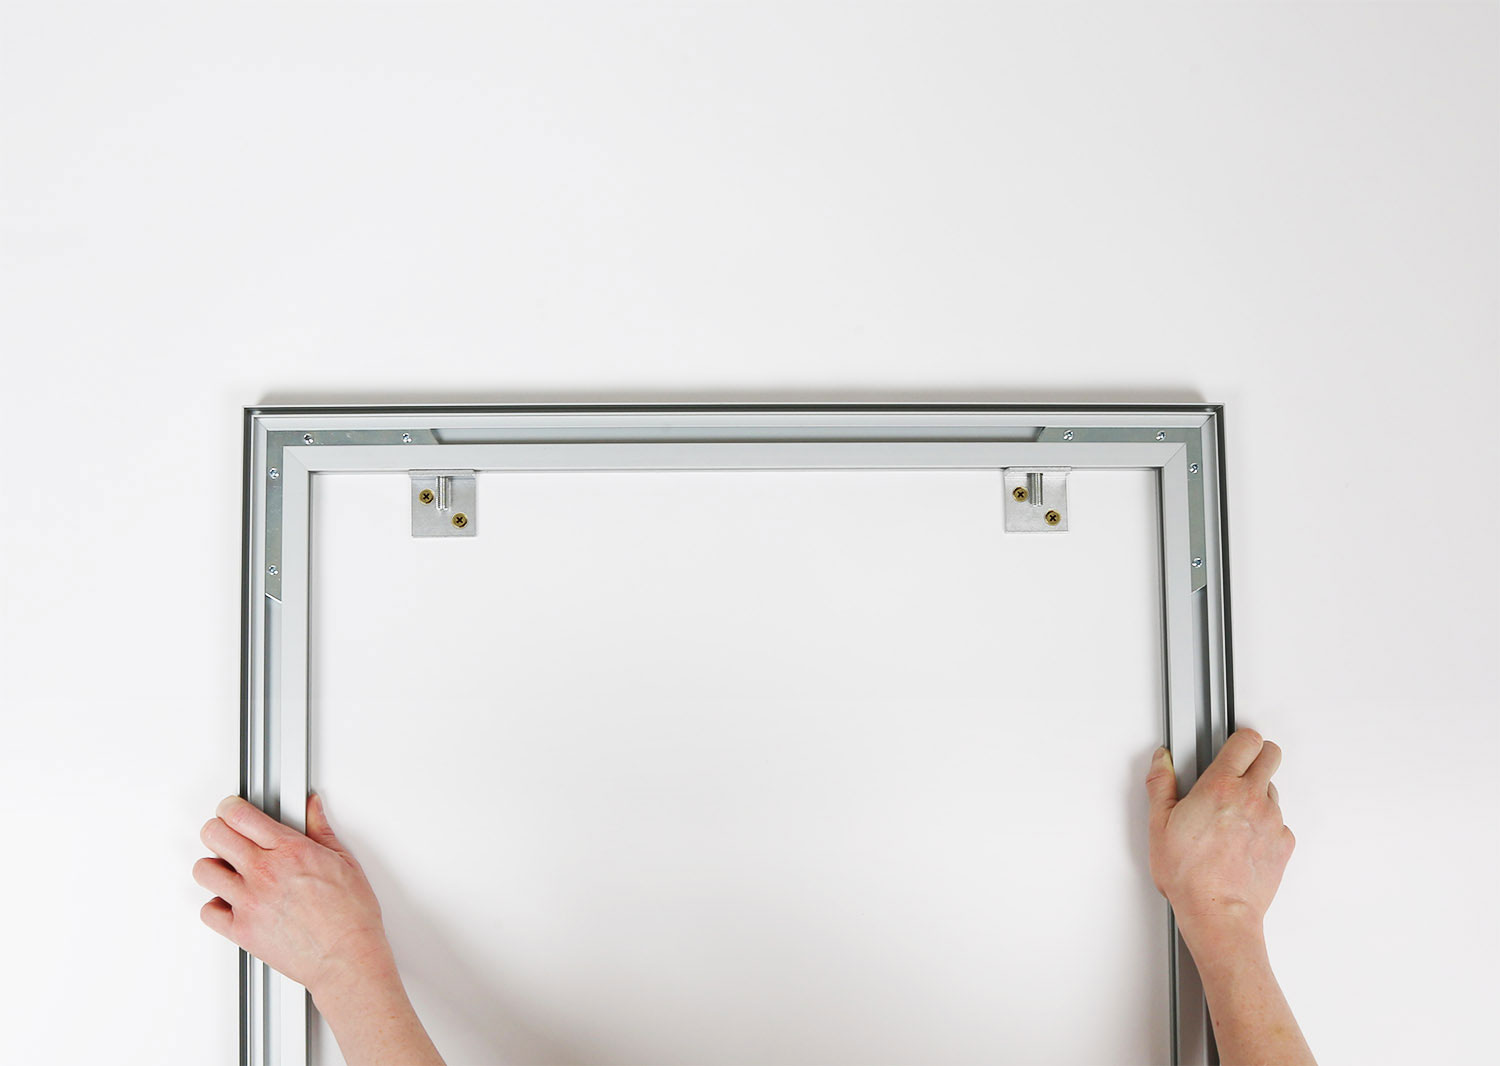 Two hands holding an aluminum frame for an SEG against a wall with its mounting hardware.